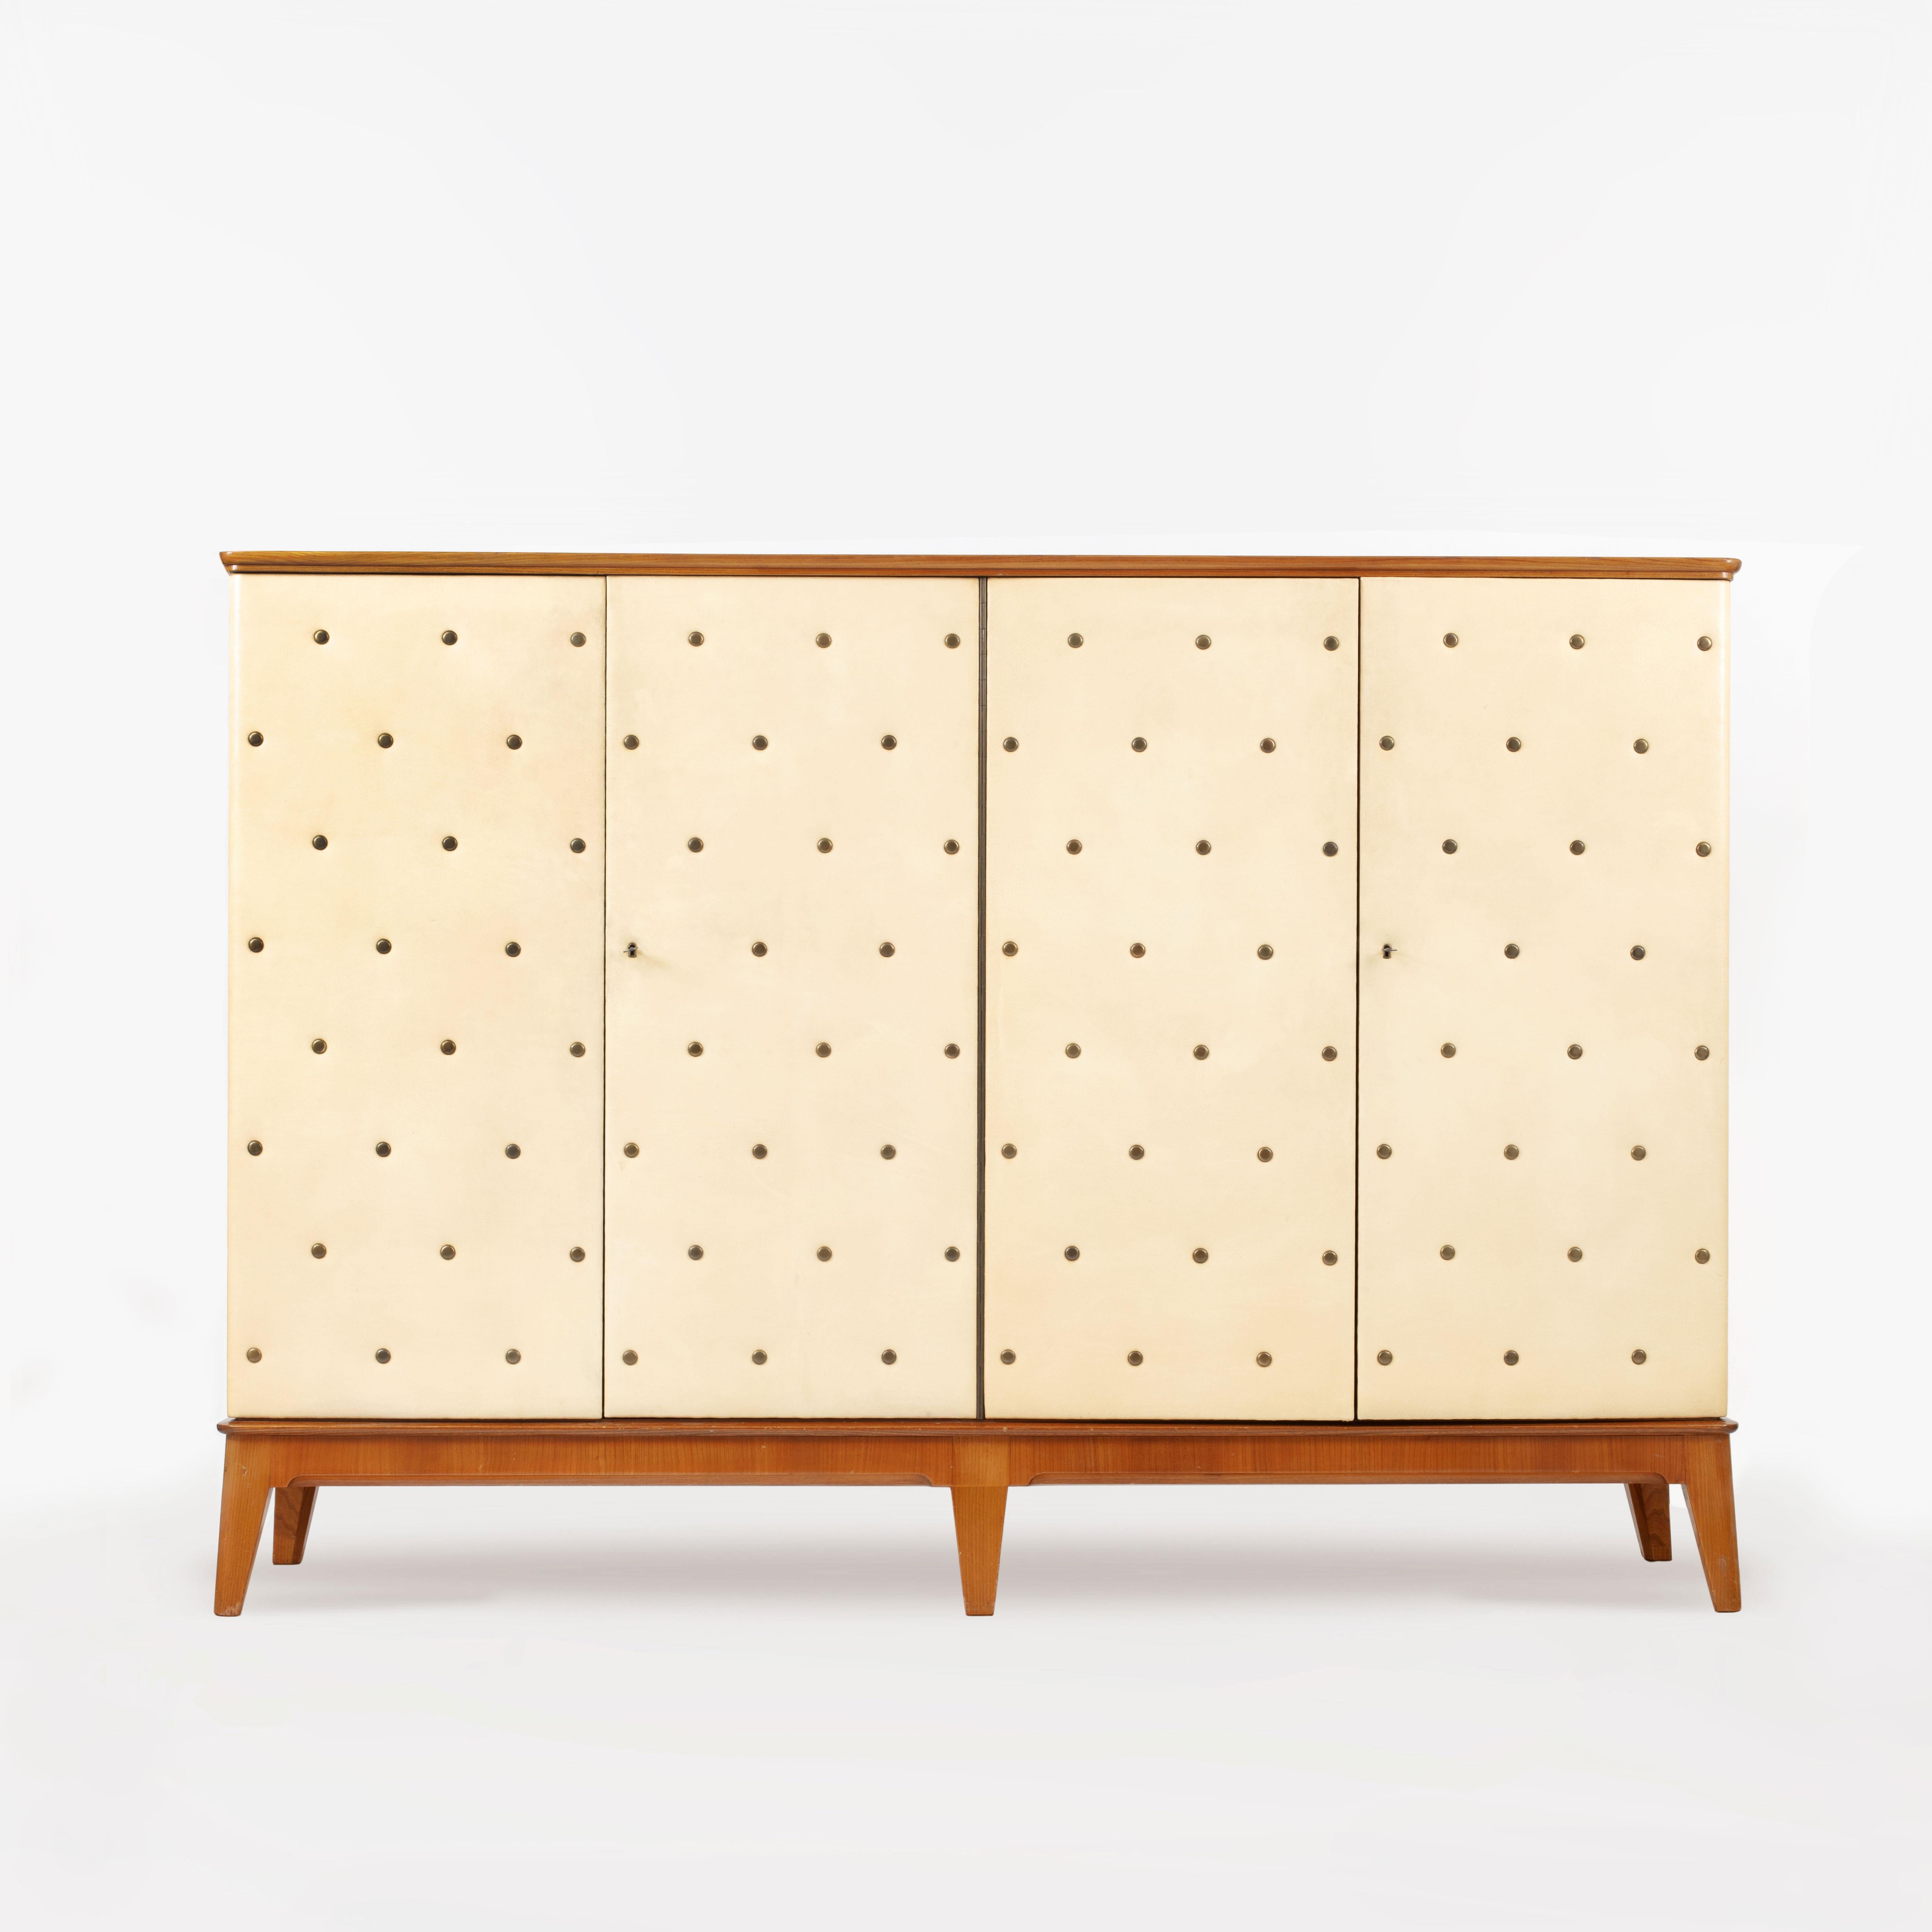 A rare, substantial Otto Schulz Cabinet, made by Boet, Sweden 1930s / 40s. Constructed from elm wood with the front and sides upholstered in cream faux leather. Seven loose shelves and four fixed drawers inside with original key present. Good